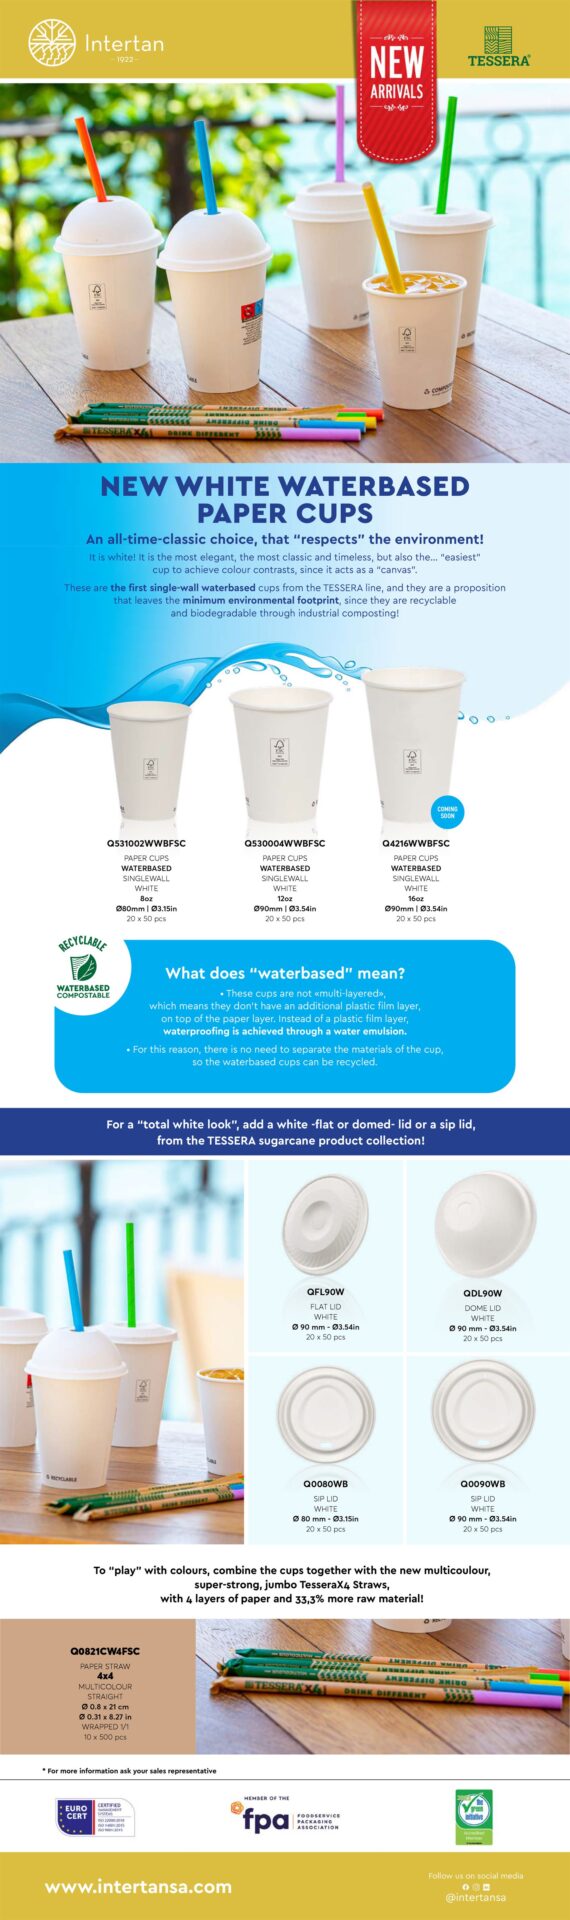 New Single-wall Waterbased White Paper Cups from TESSERA Newsletter | Intertan S.A.